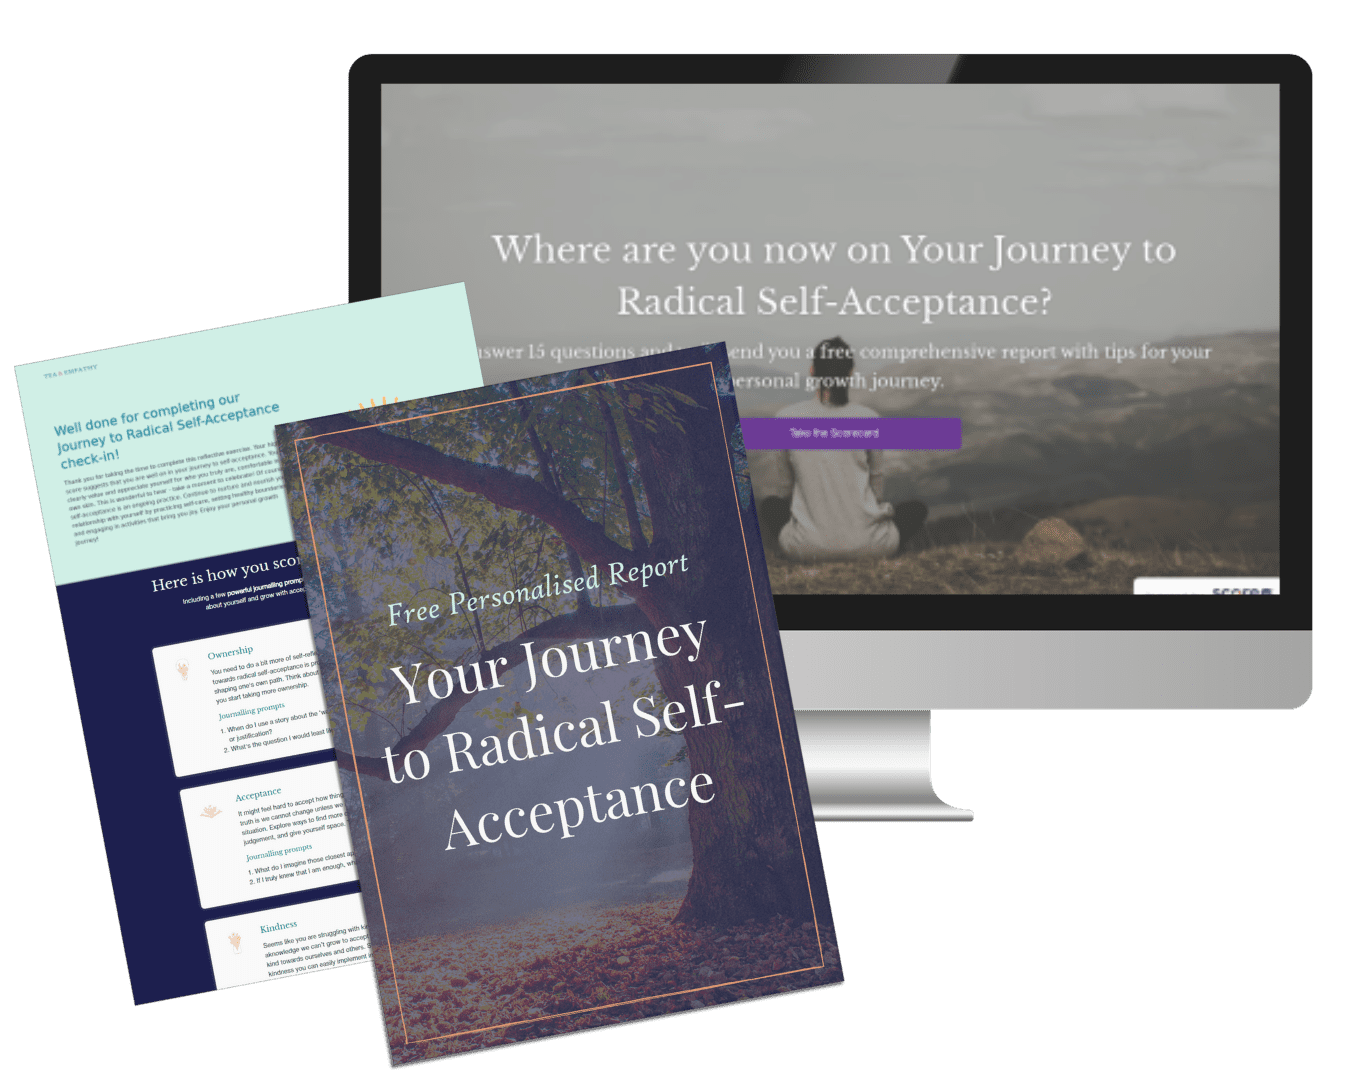 Your Journey to Radical Self-Acceptance scorecard + report